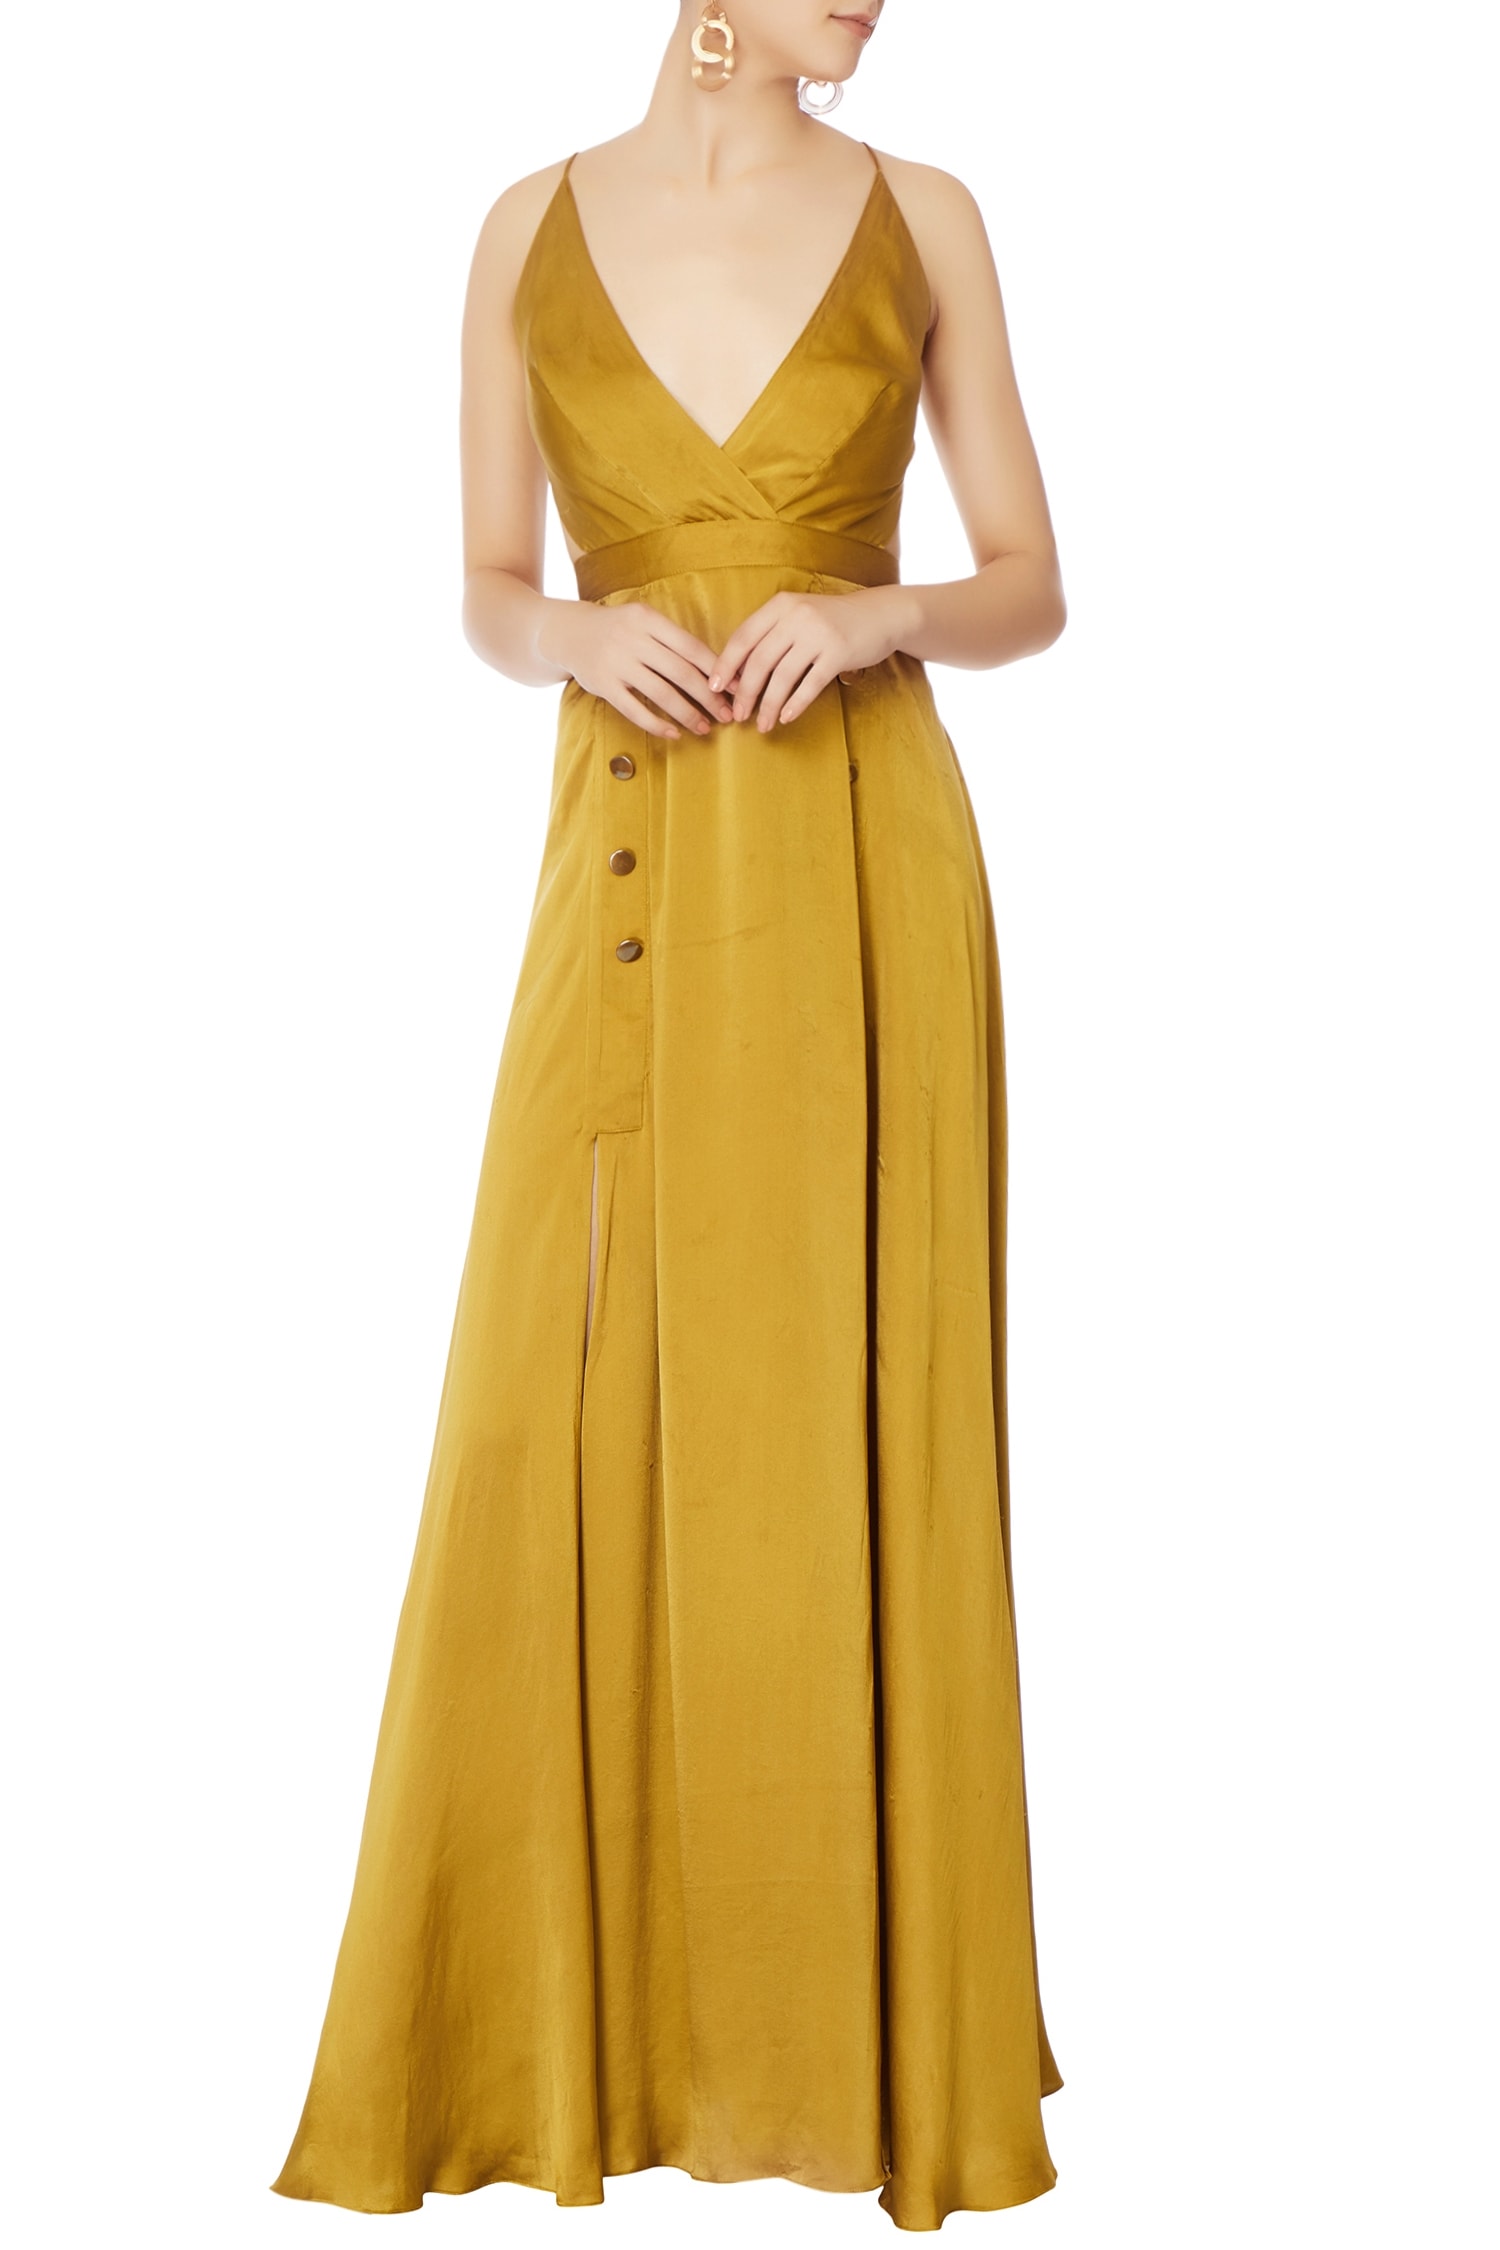 Deme by Gabriella Green V Neck Empire Line Gown For Women